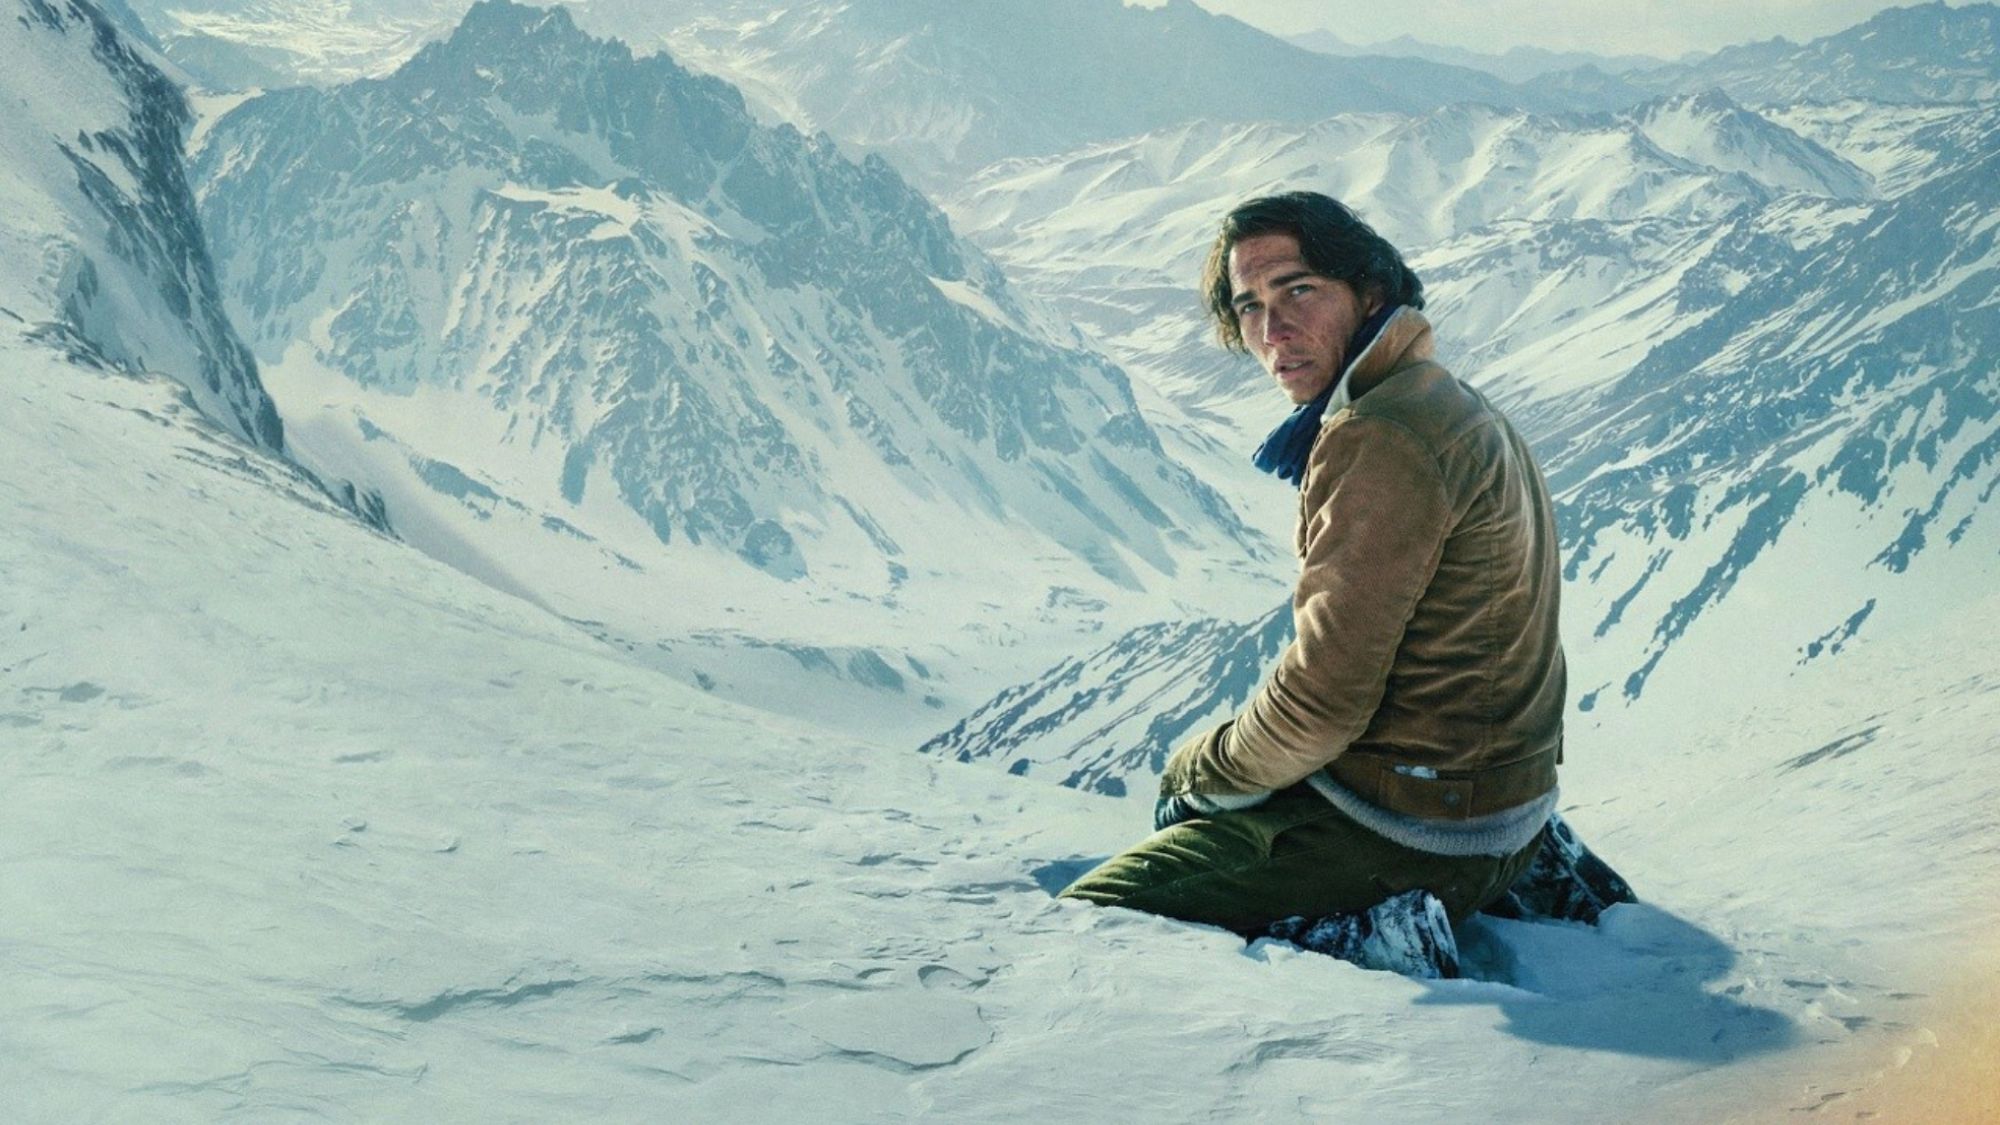 Society of the Snow: the tragic real-life story behind new Netflix hit